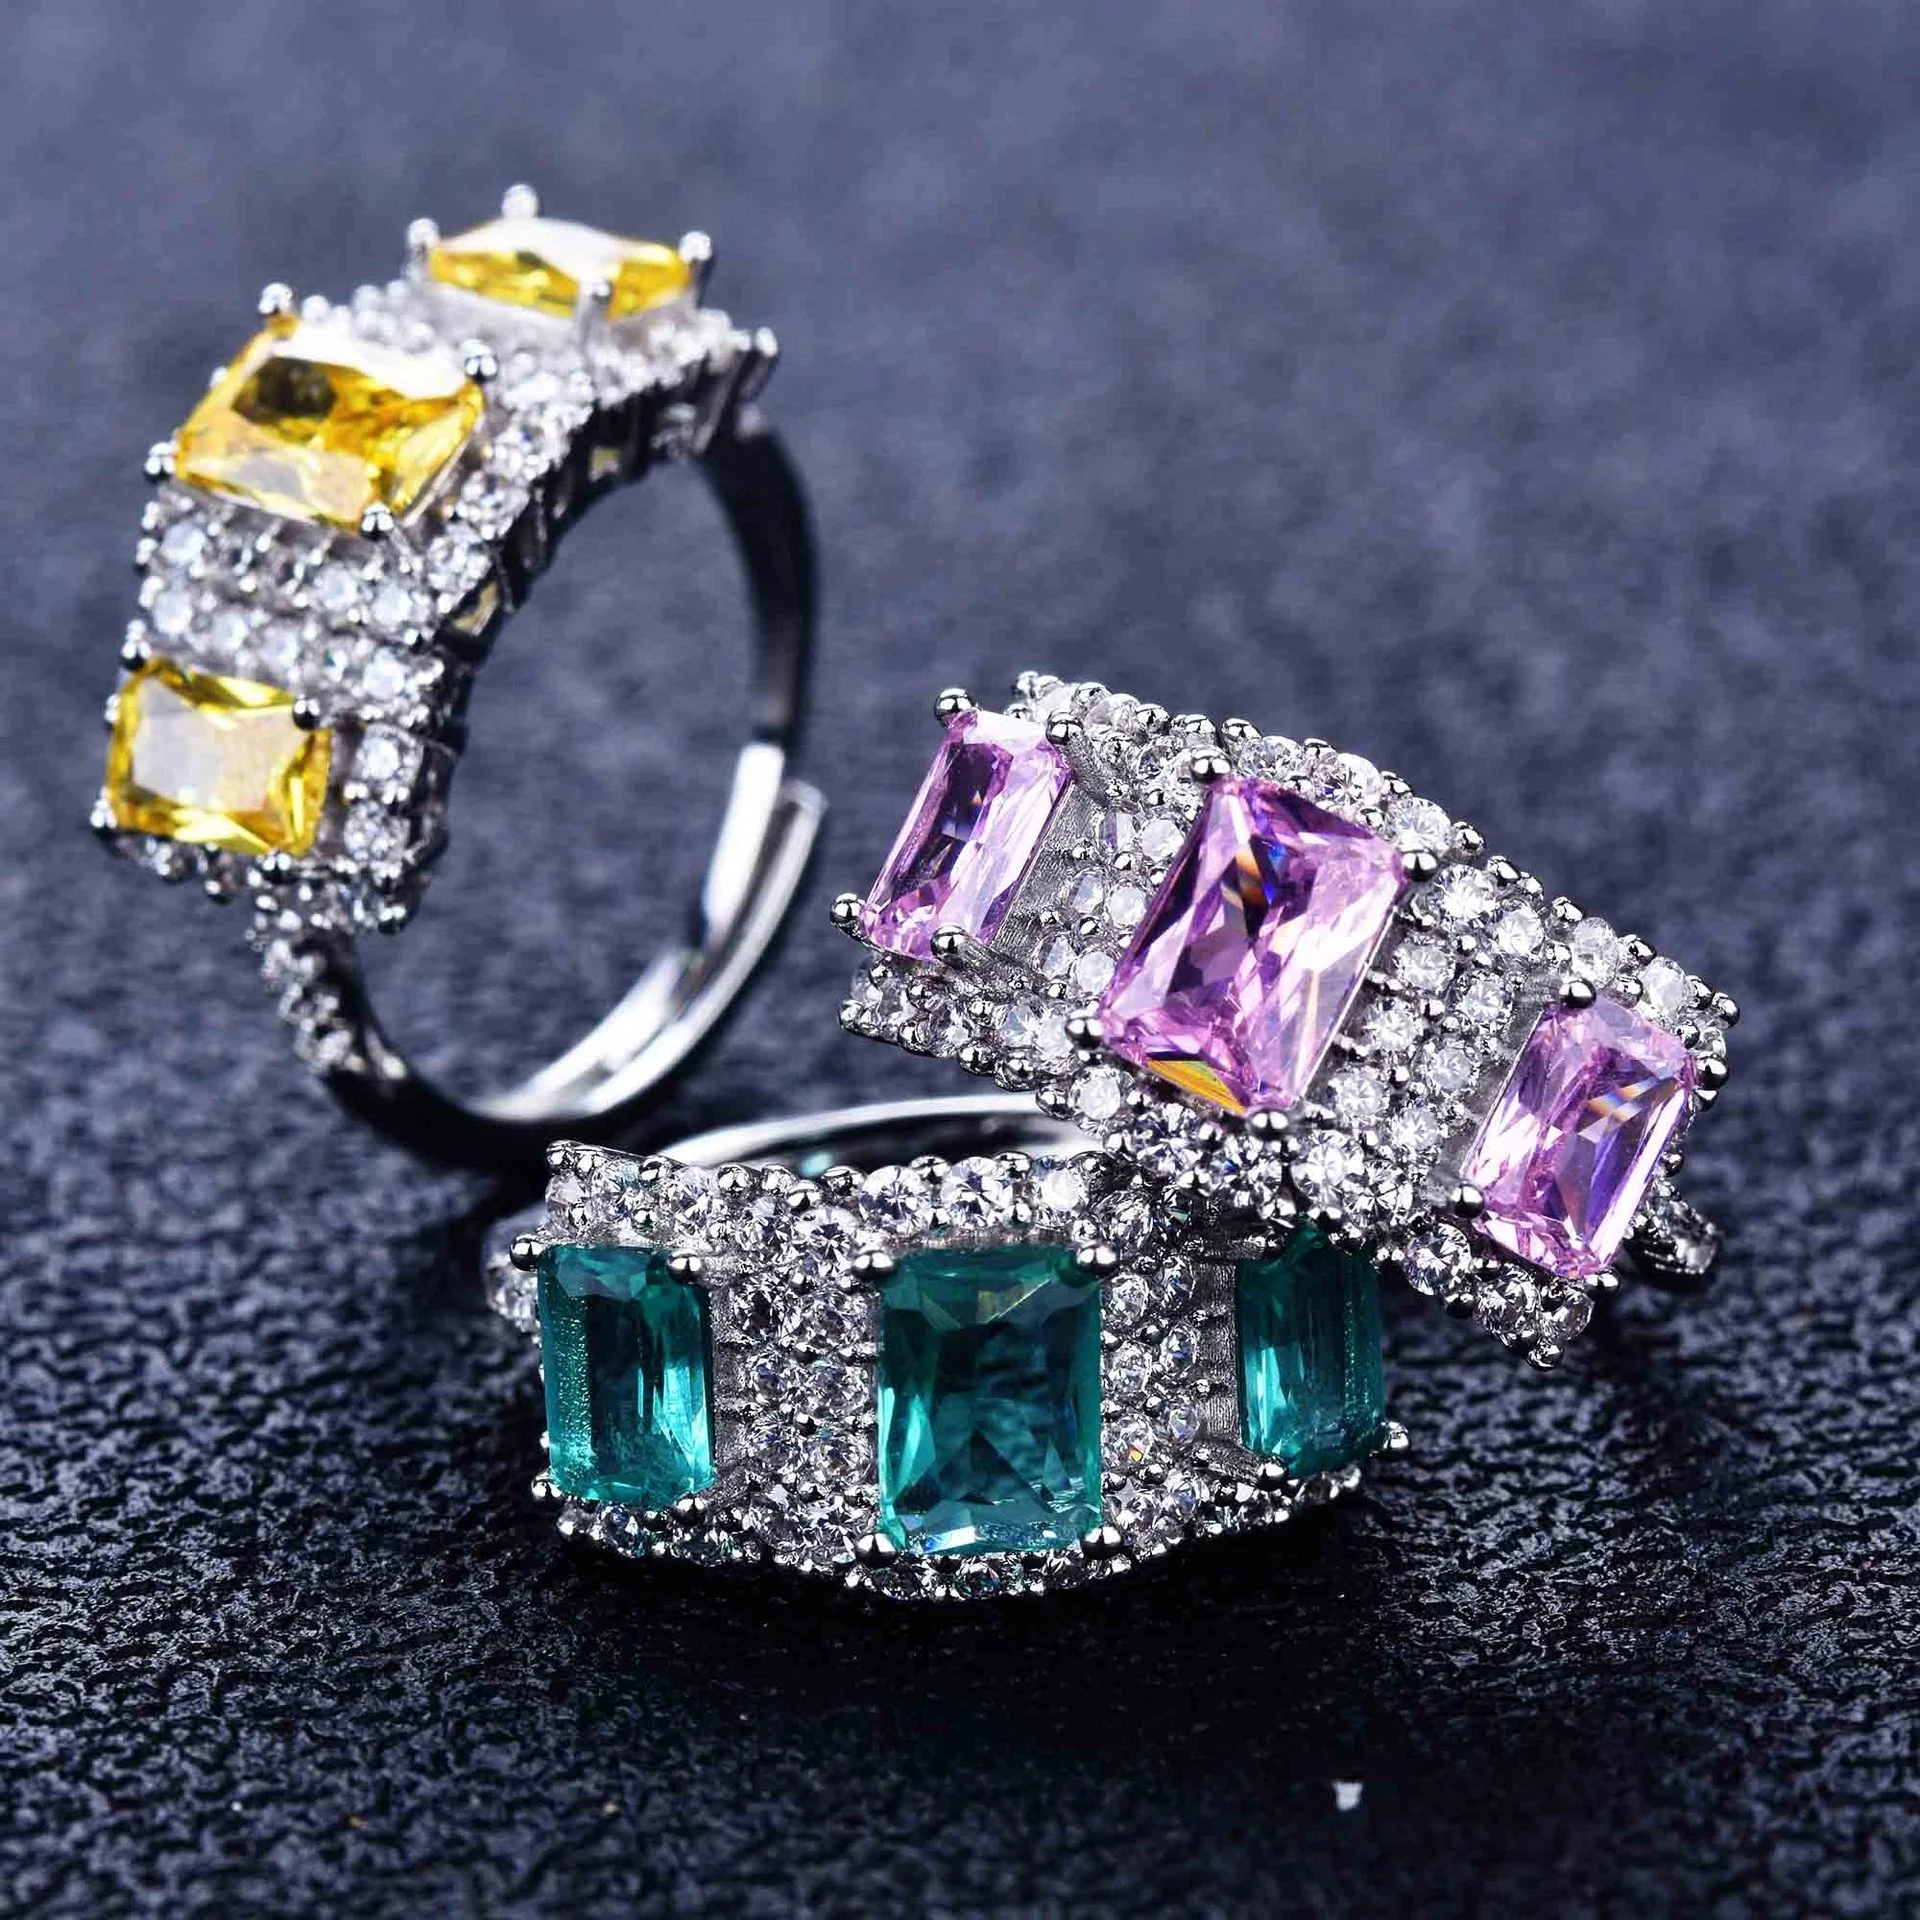 

Vintage Finger Rings Square Pink Yellow/Green Cubic Zircon Jewelry Women's Wedding Engagement Eternity Ring Gift, Picture shows